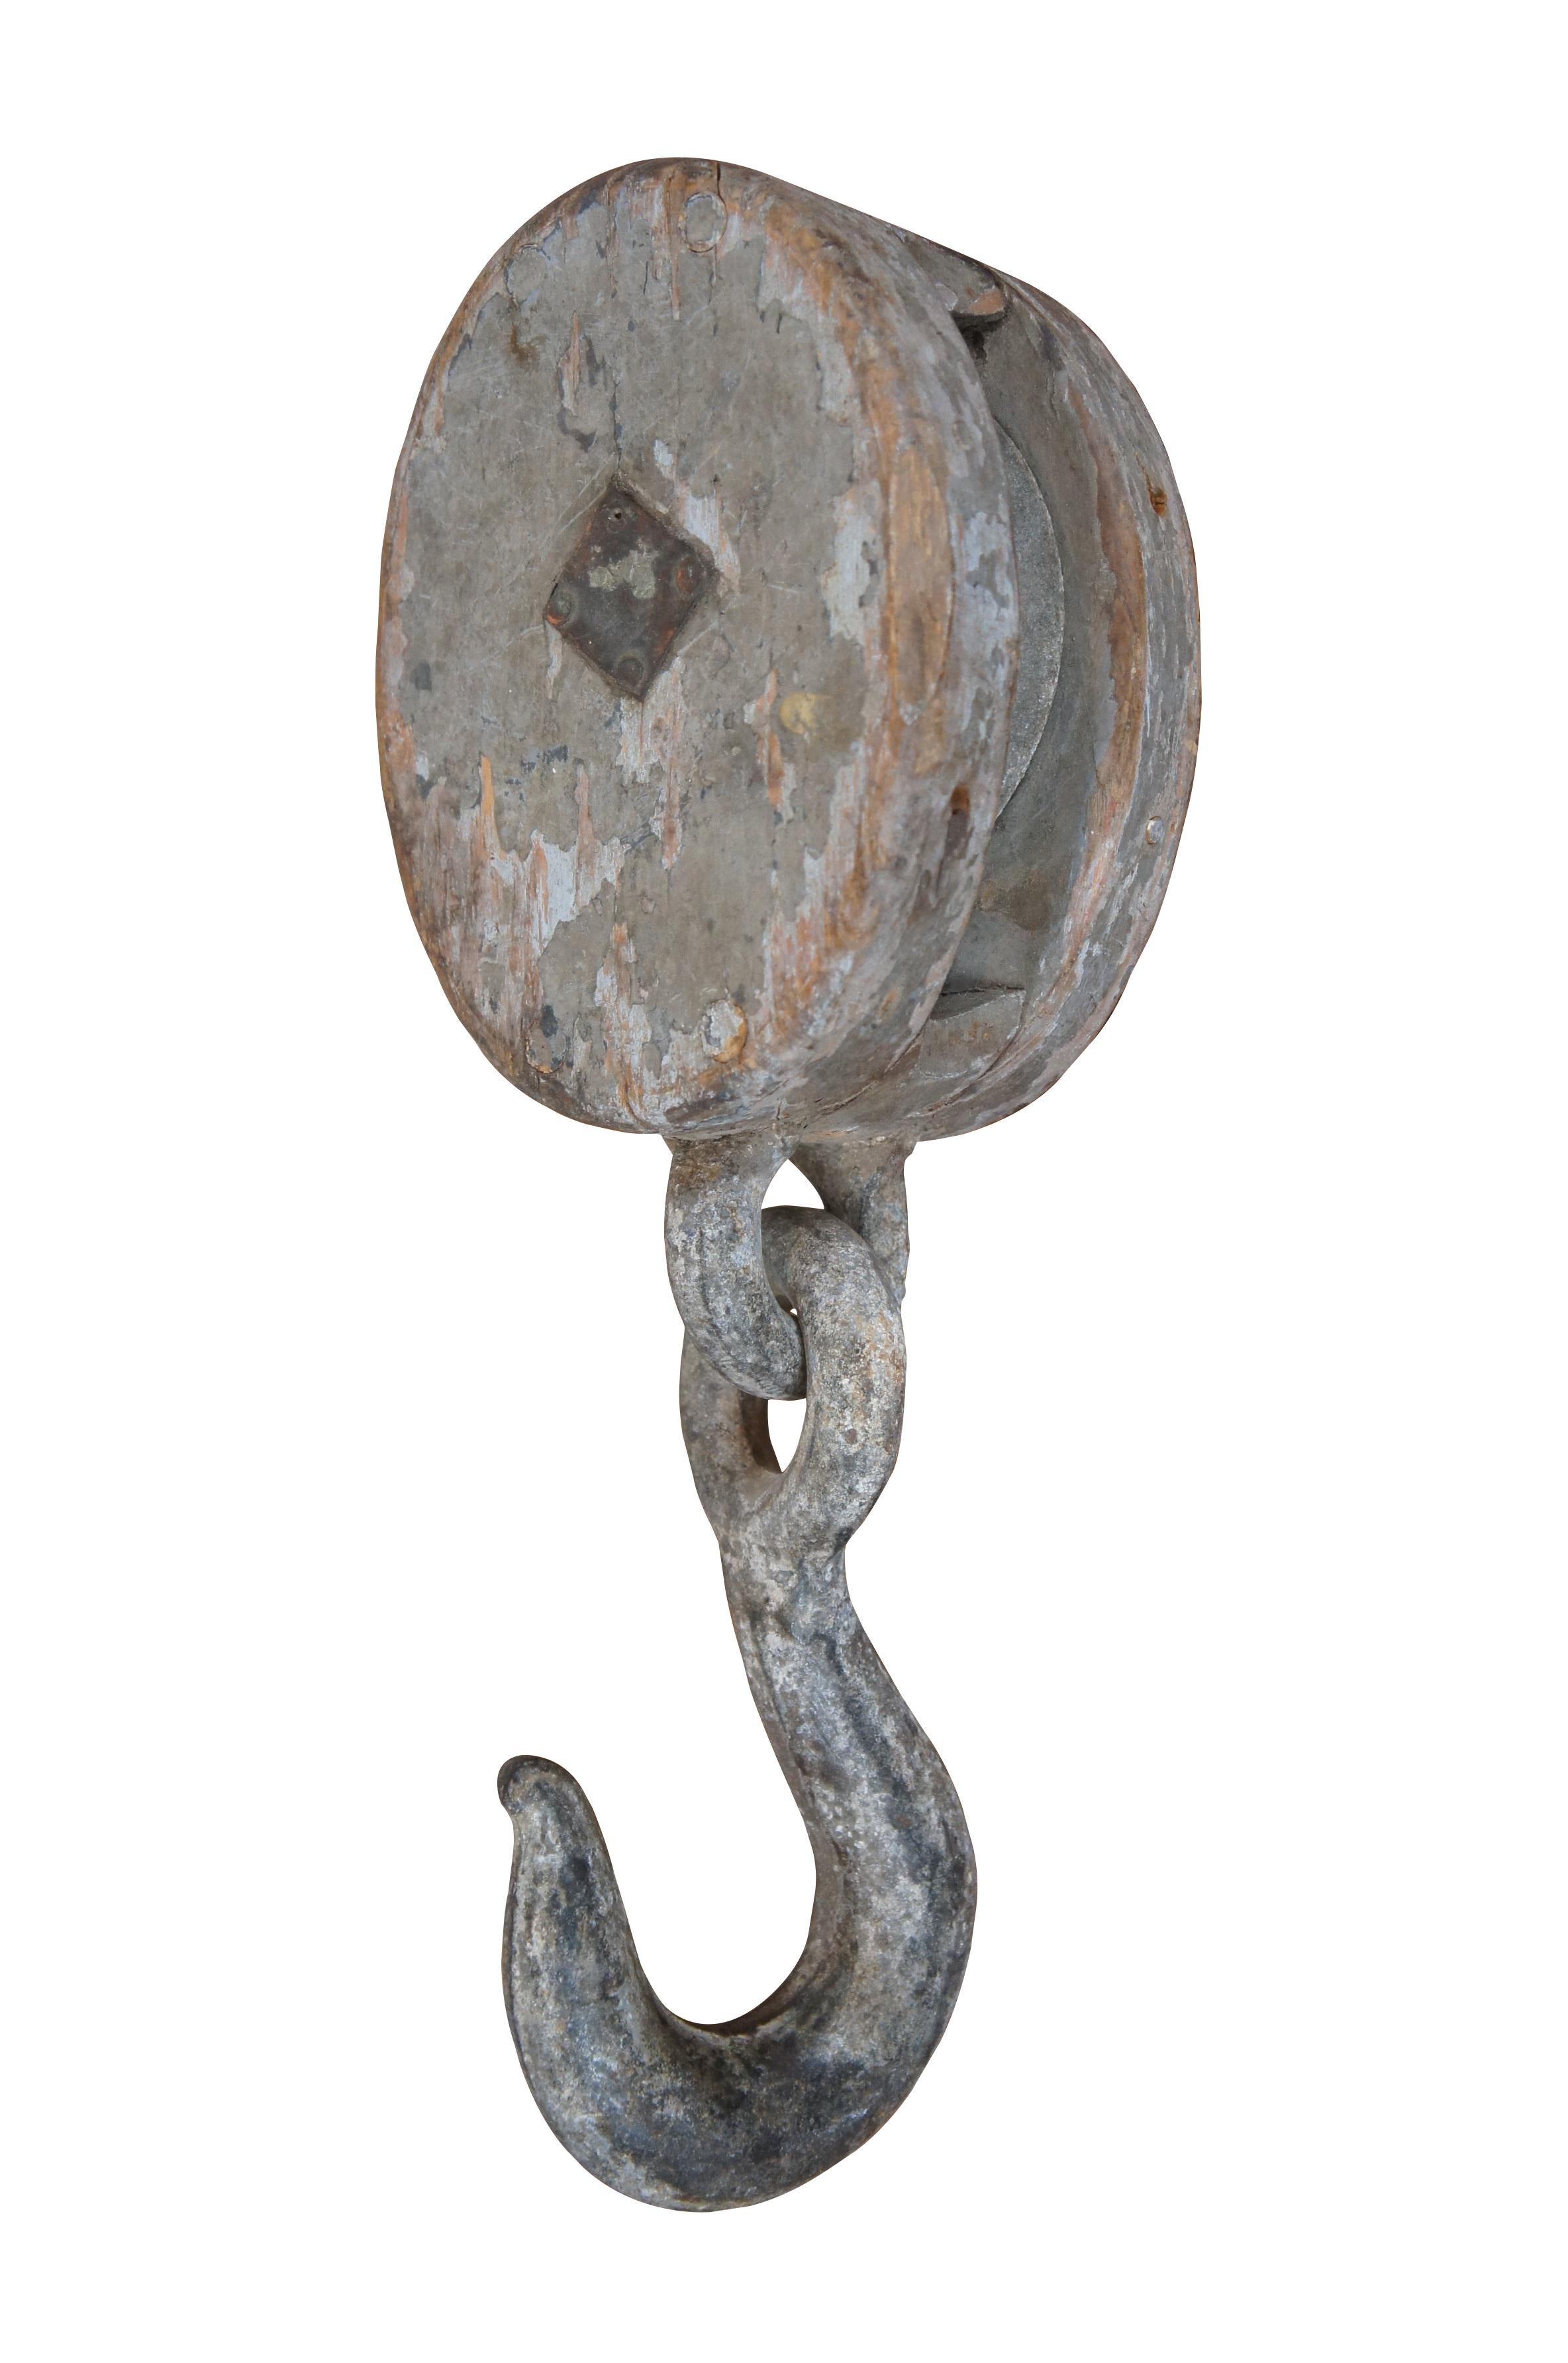 Pair of antique wood block and iron industrial pulley hooks. Larger has one pulley wheel, smaller contains two pulley wheels.

Dimensions:
Large - 5